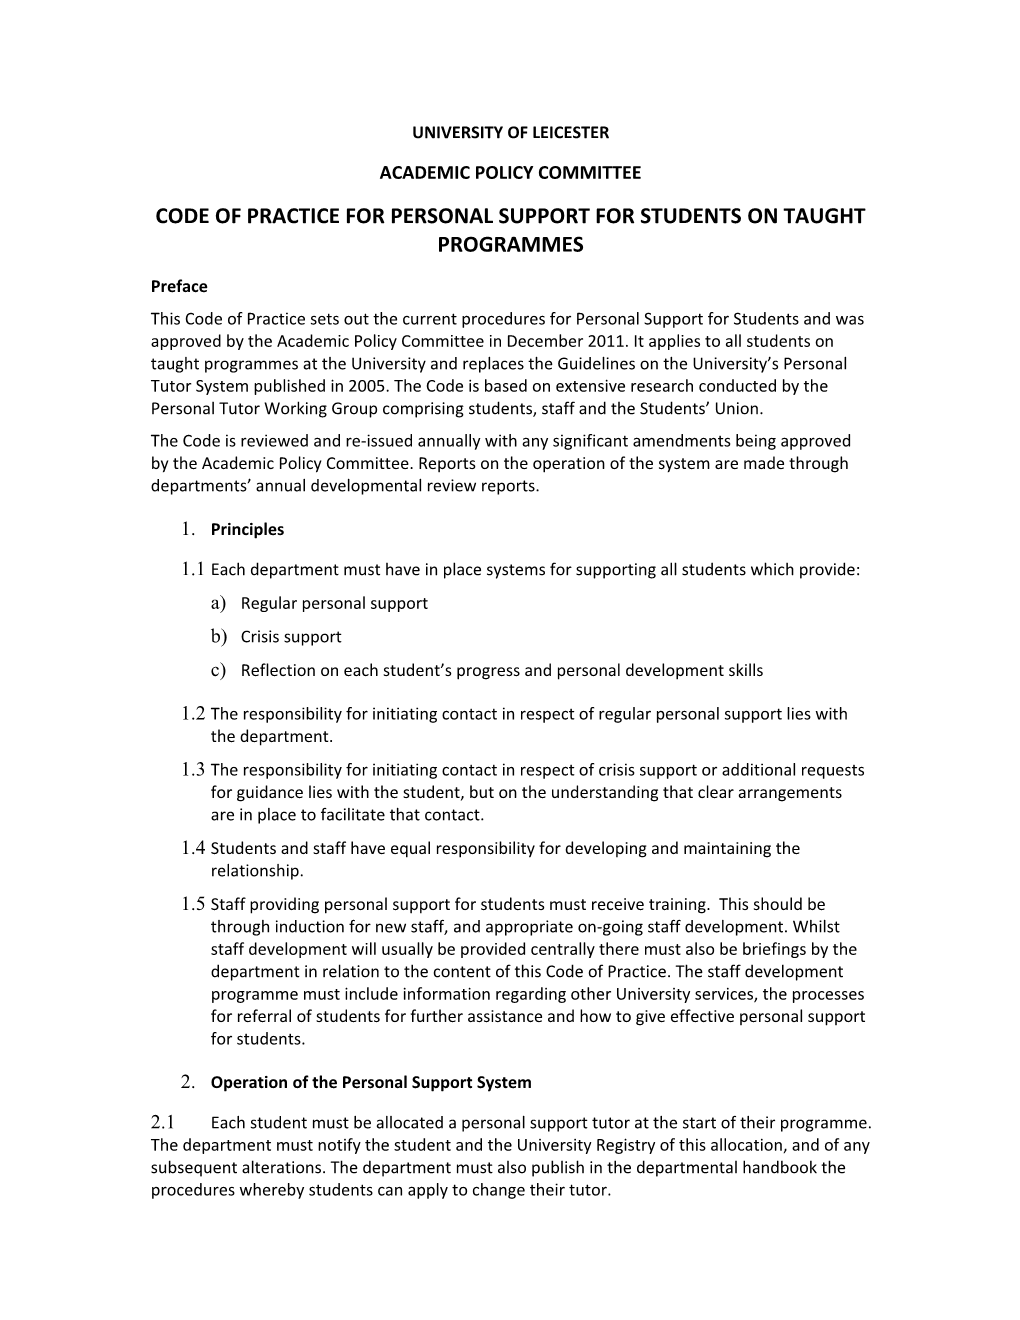 Code of Practice for Personal Support for Students on Taught Programmes